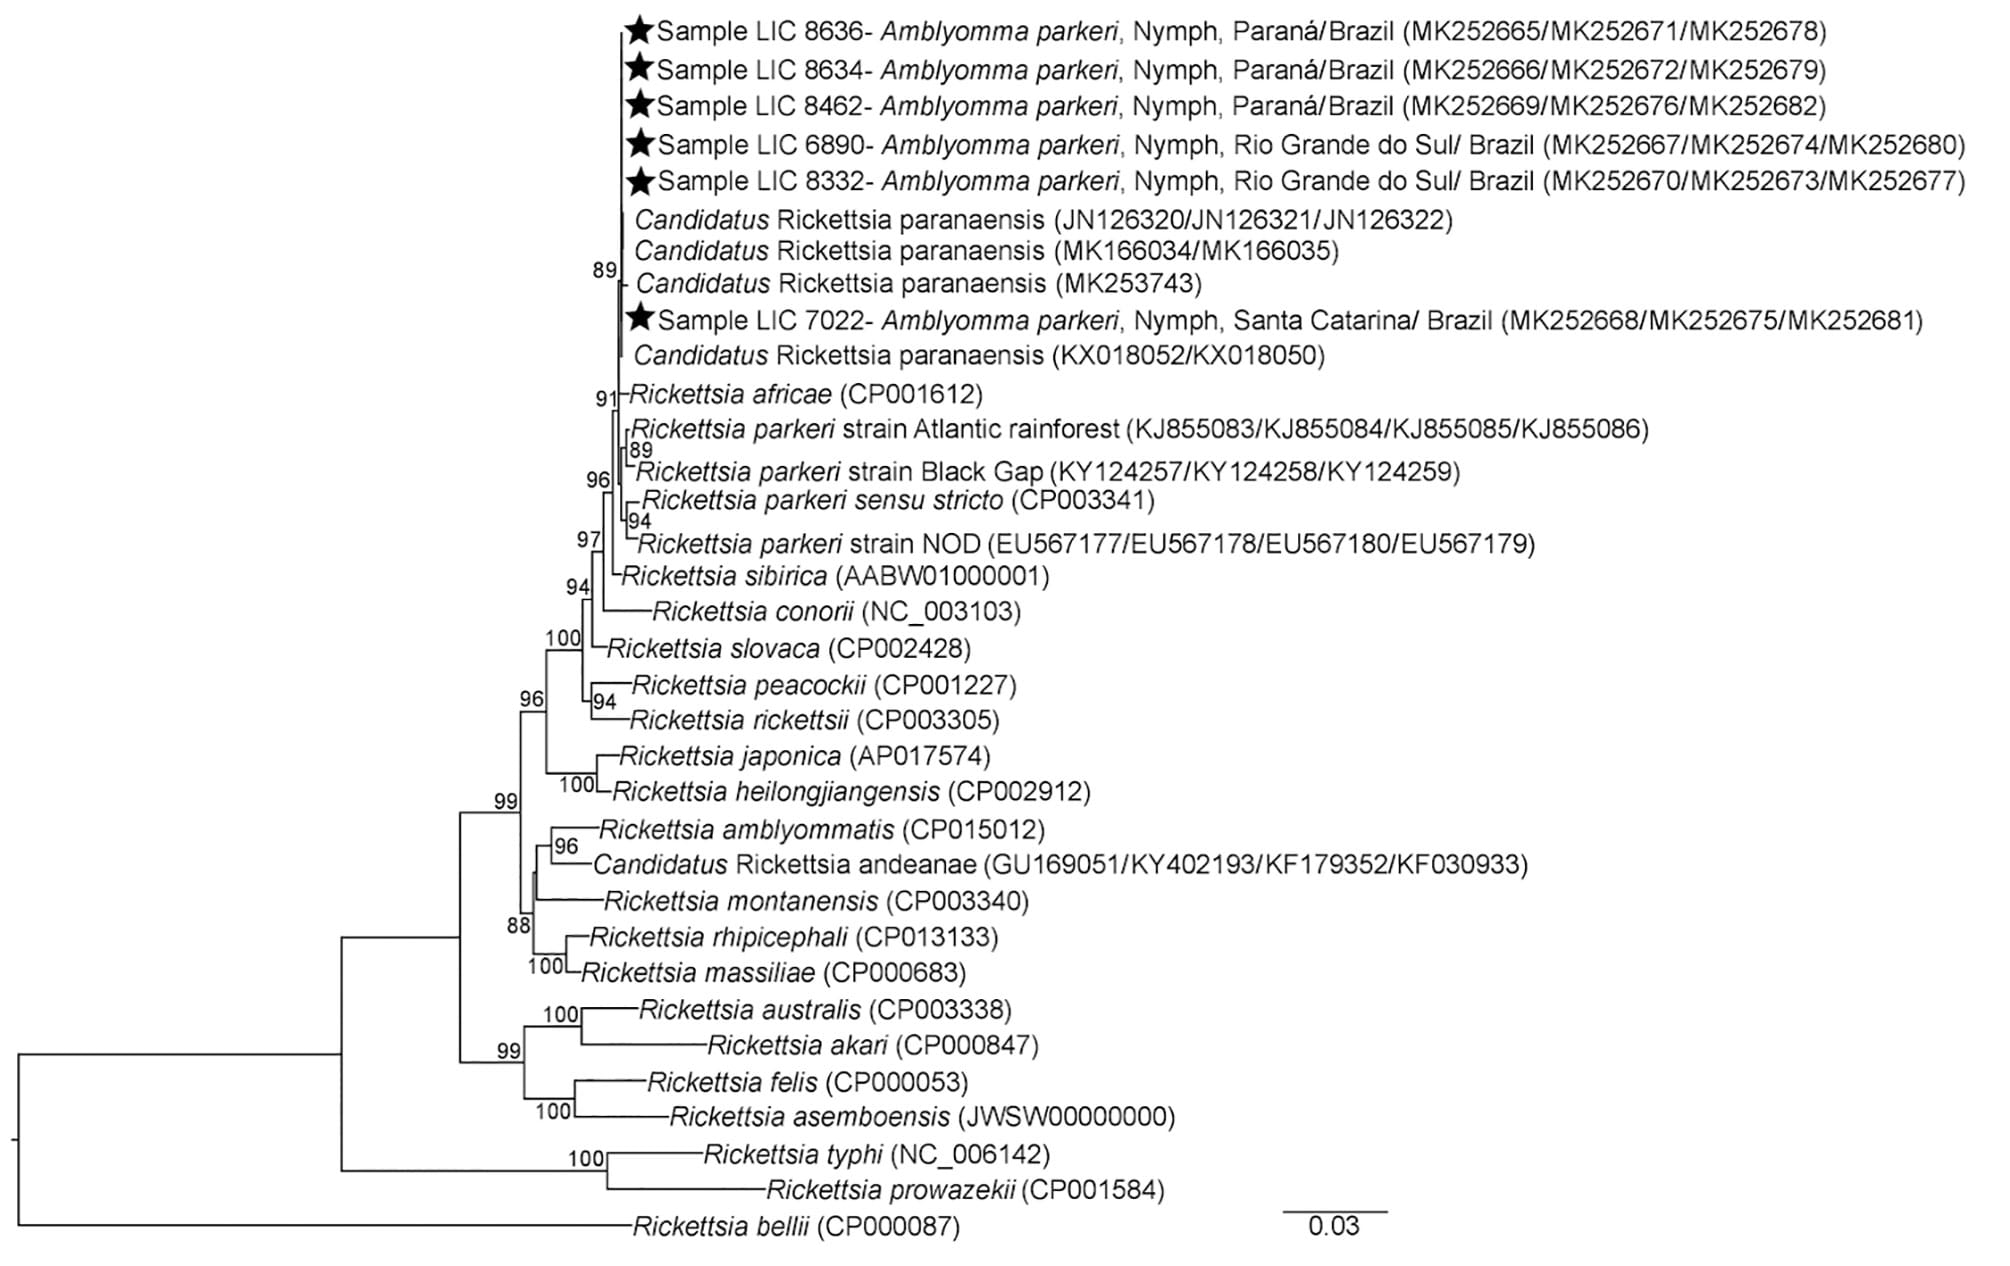 Concatenated phylogenetic analysis of rickettsia gene fragments detected in Amblyomma parkeri ticks in Brazil. Gene fragments gltA (1,013 bp), htrA (370 bp), ompA (494 bp), and ompB (822 bp) were inferred by maximum-likelihood analysis with the evolution model T92 + G (Tamura model). Values on the branches indicate bootstrap values (cutoff value 70%). Stars indicate sequences obtained in this study. GenBank accession numbers are given in parentheses. Scale bar indicates nucleotide substitutions 